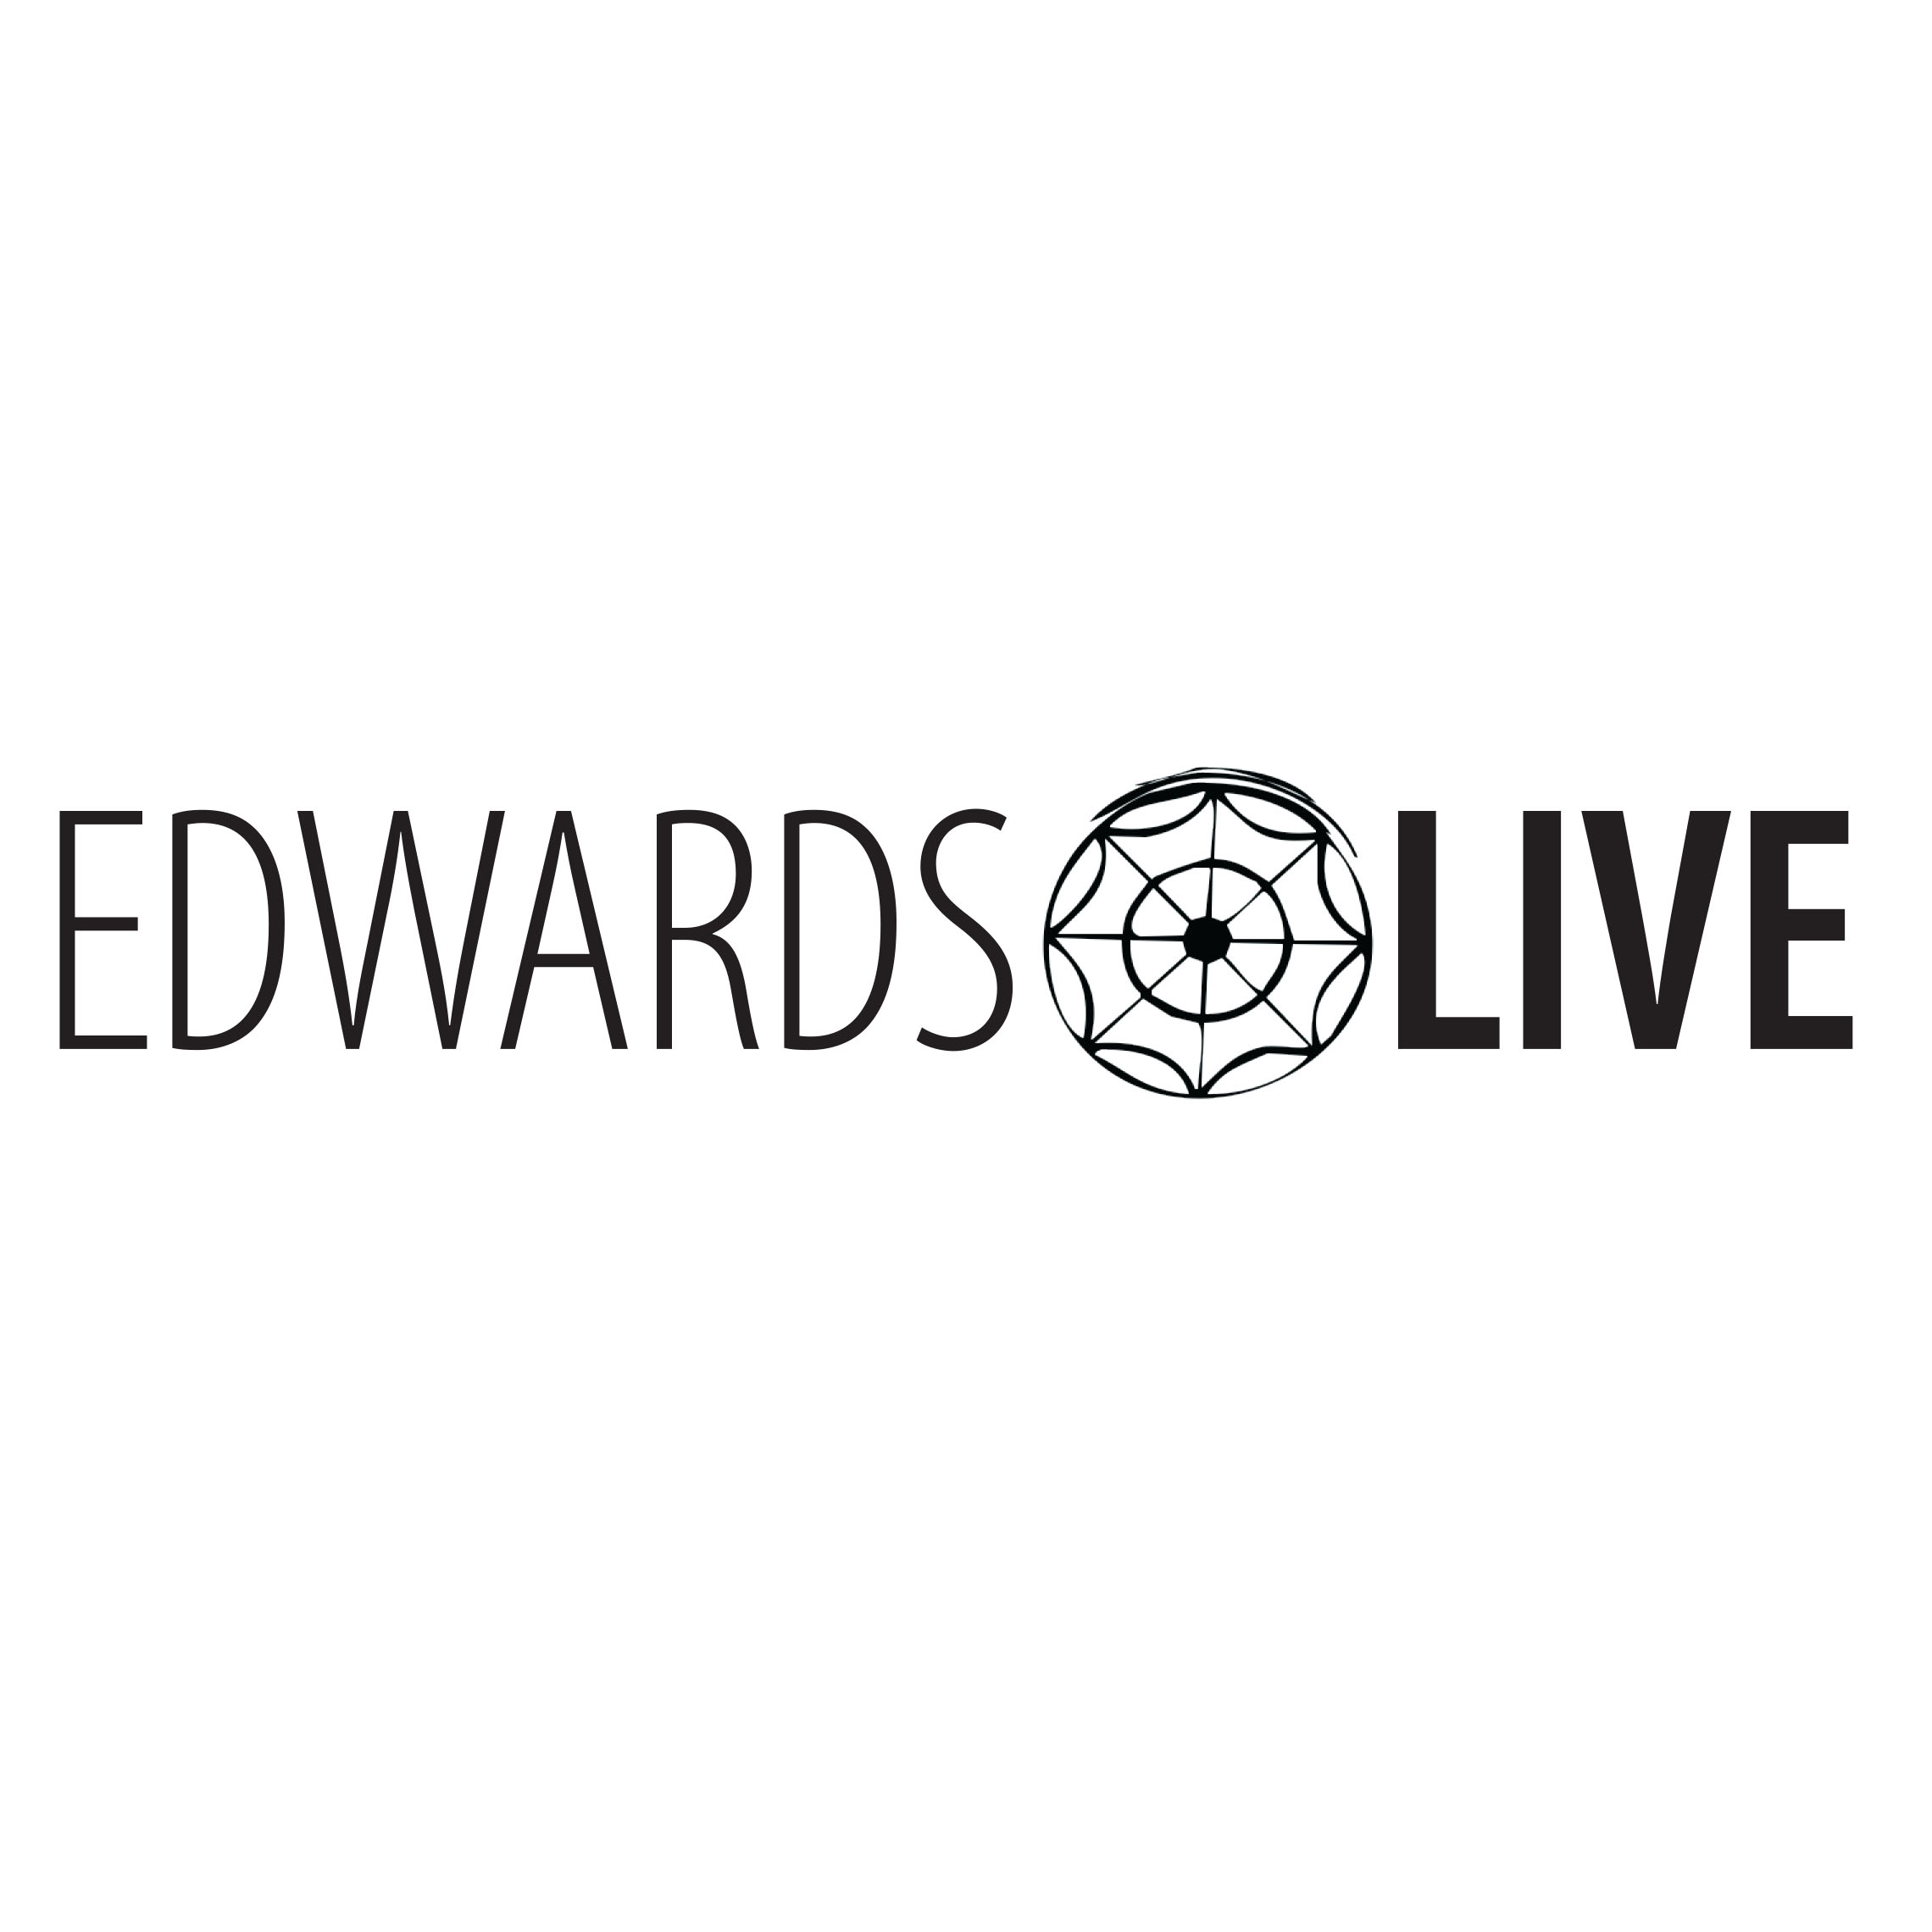 Humanities college launches online content initiative called Edwards Live to keep students connected and engaged with goings-on within the college.